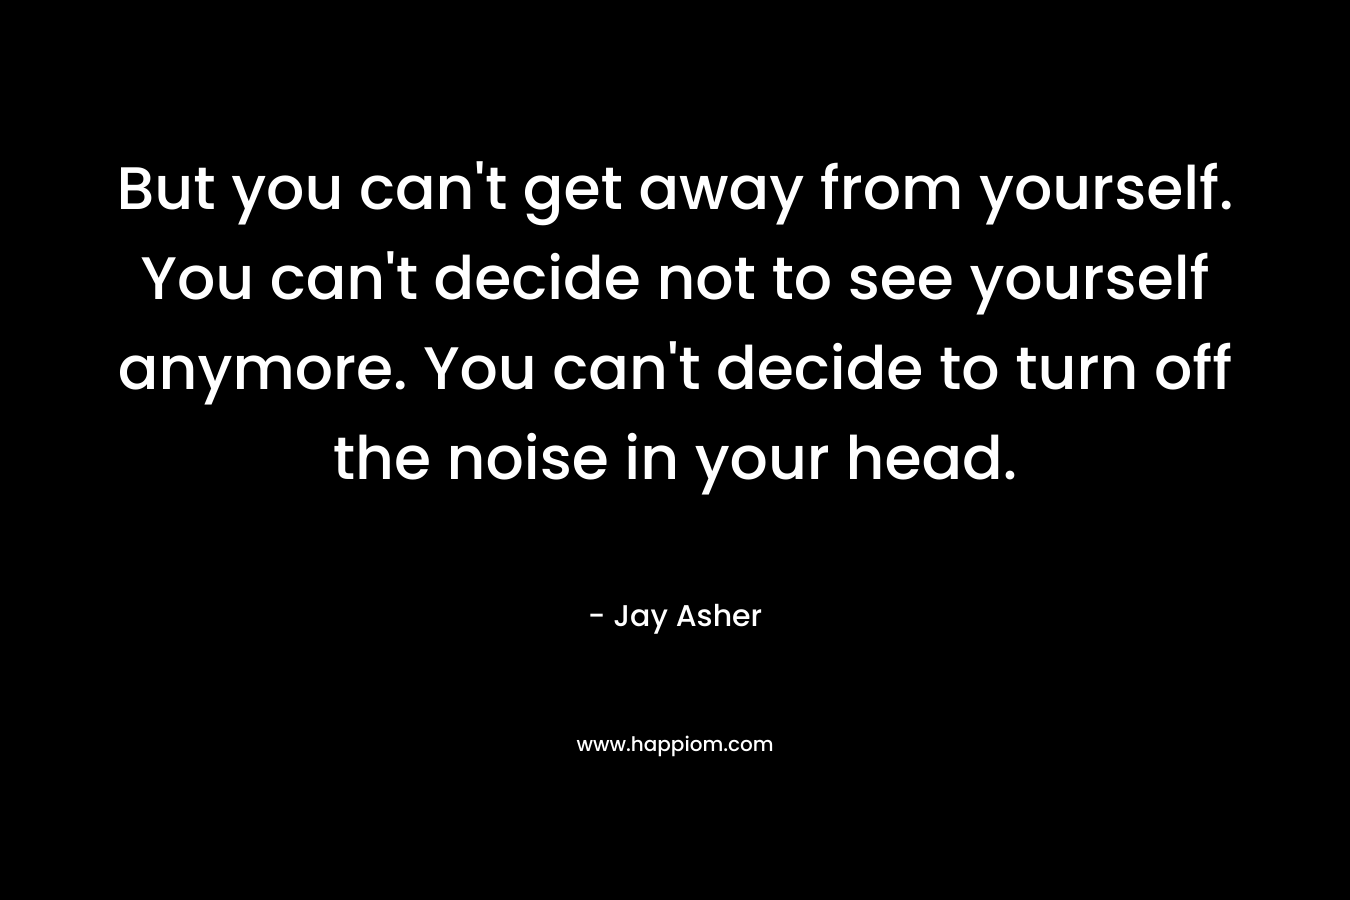 But you can't get away from yourself. You can't decide not to see yourself anymore. You can't decide to turn off the noise in your head.